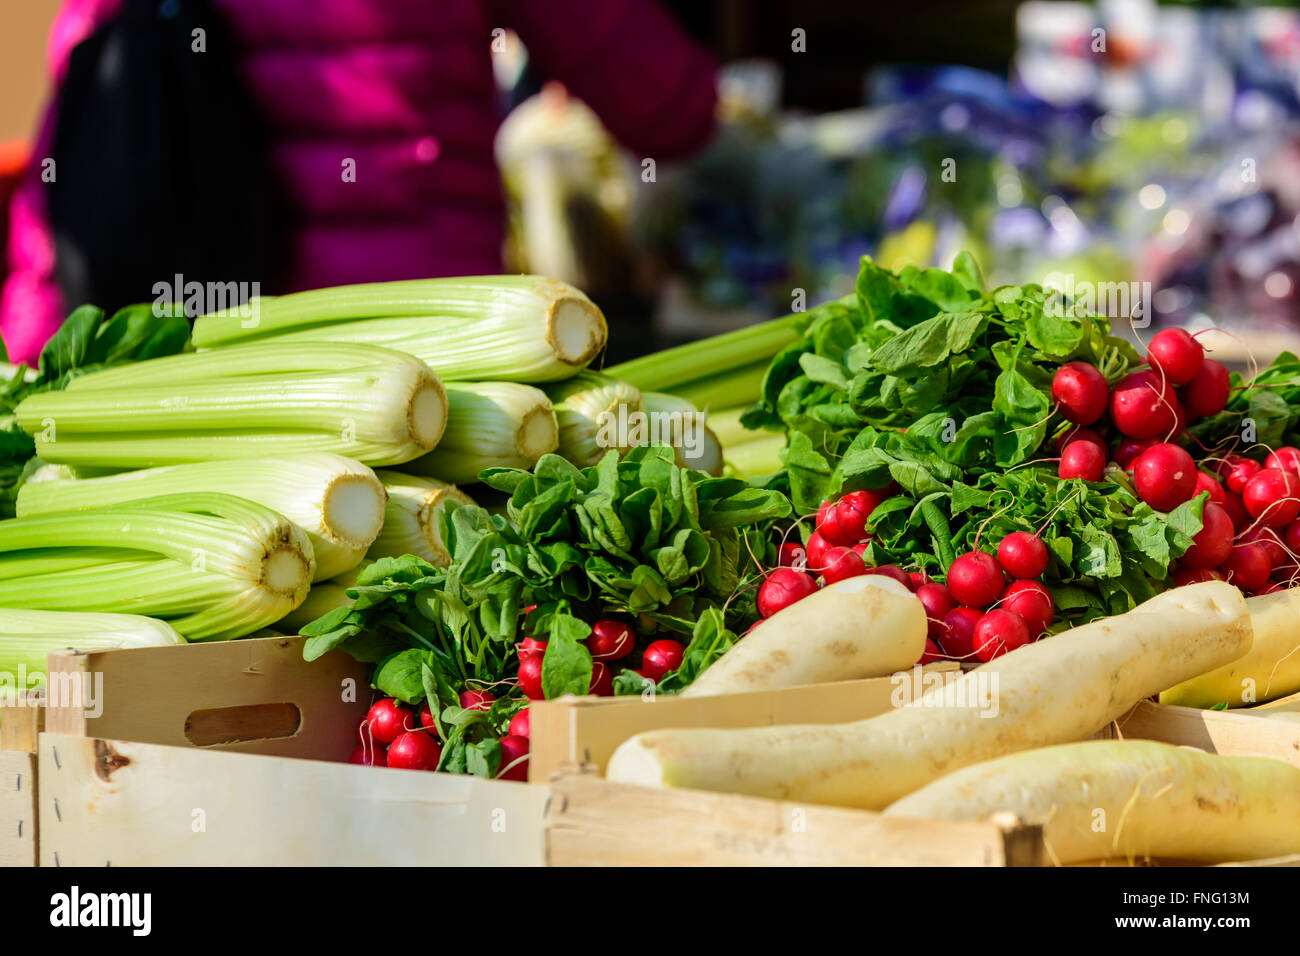 Celery, radish and daikon on sale at market. Focus on the red radishes. Stock Photo